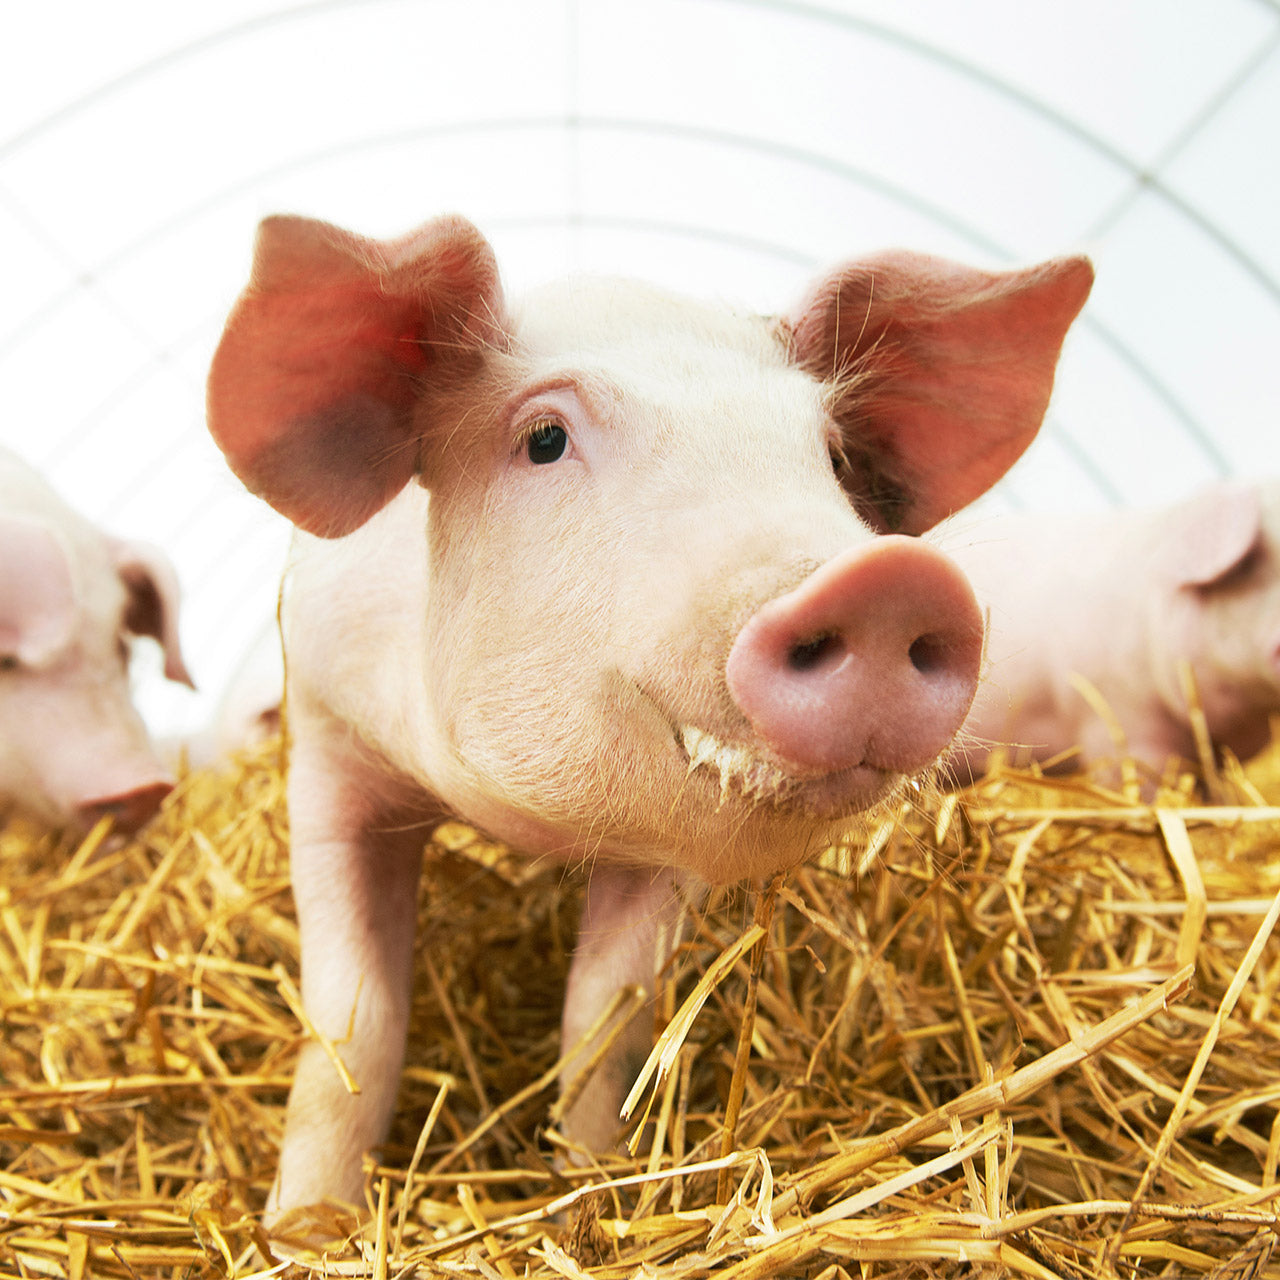 Effective ways to help keep your piglets healthy